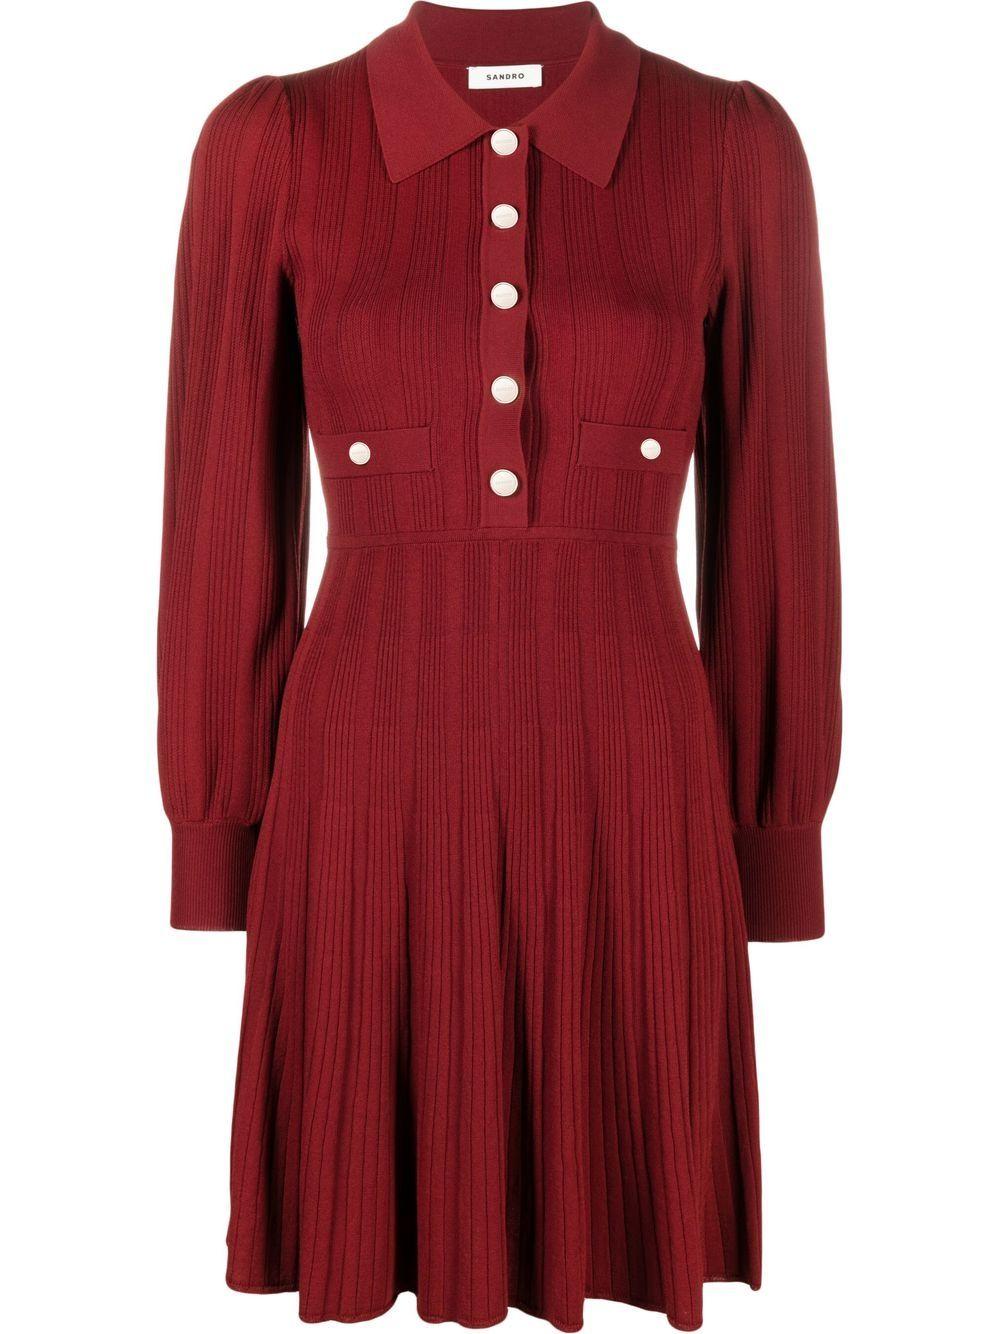 Sandro Lison Buttoned Rib-knit Dress in Red | Lyst